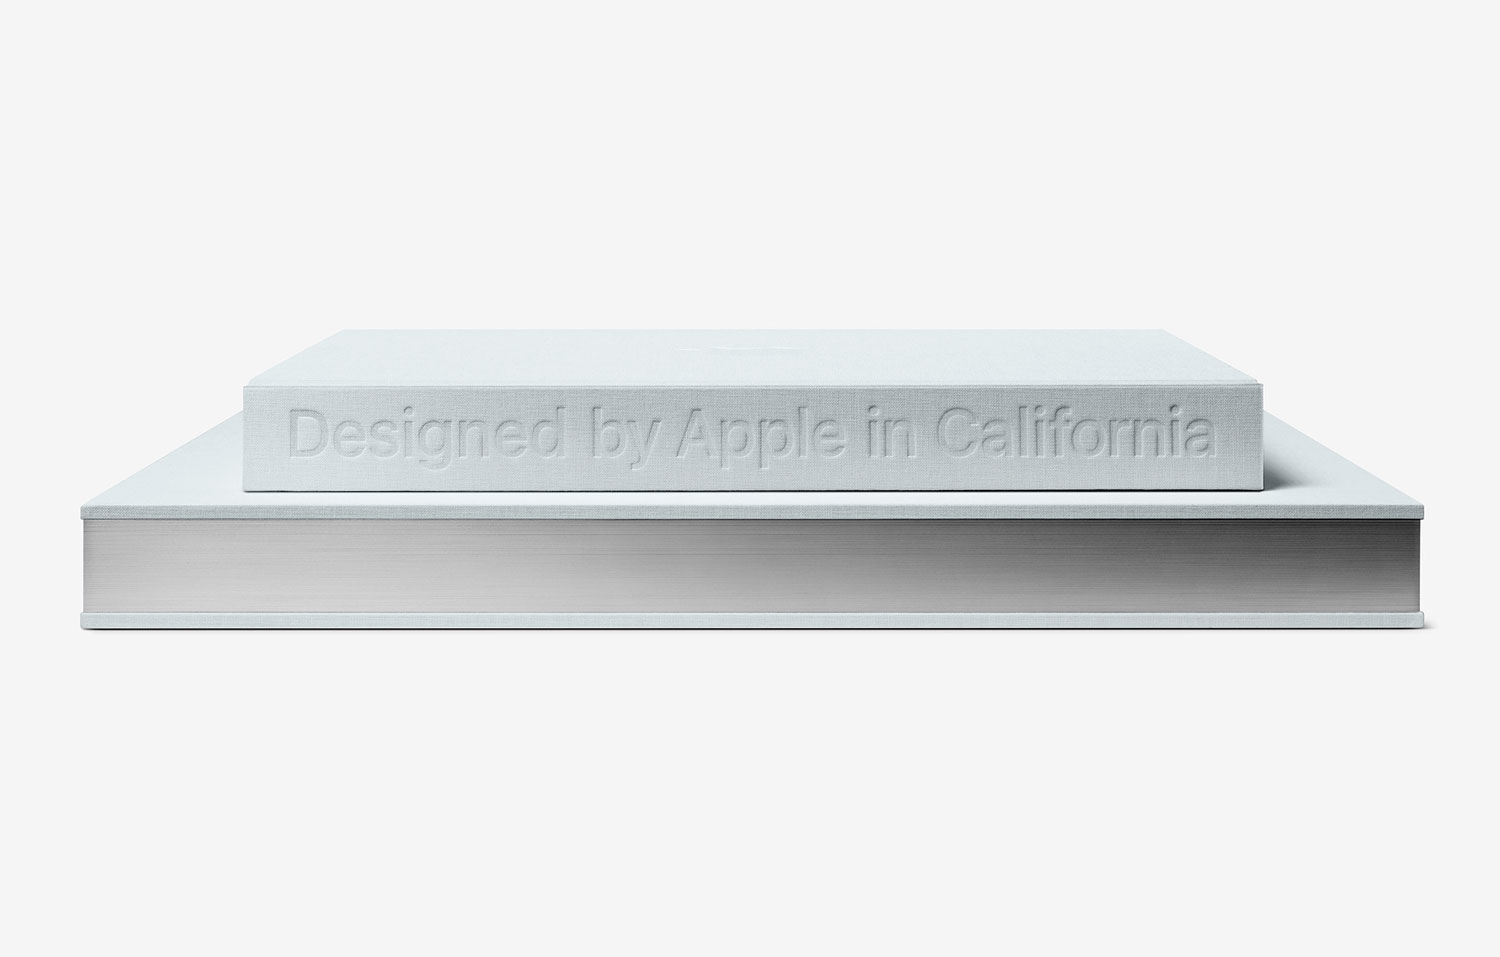 designed-by-apple-in-california-5